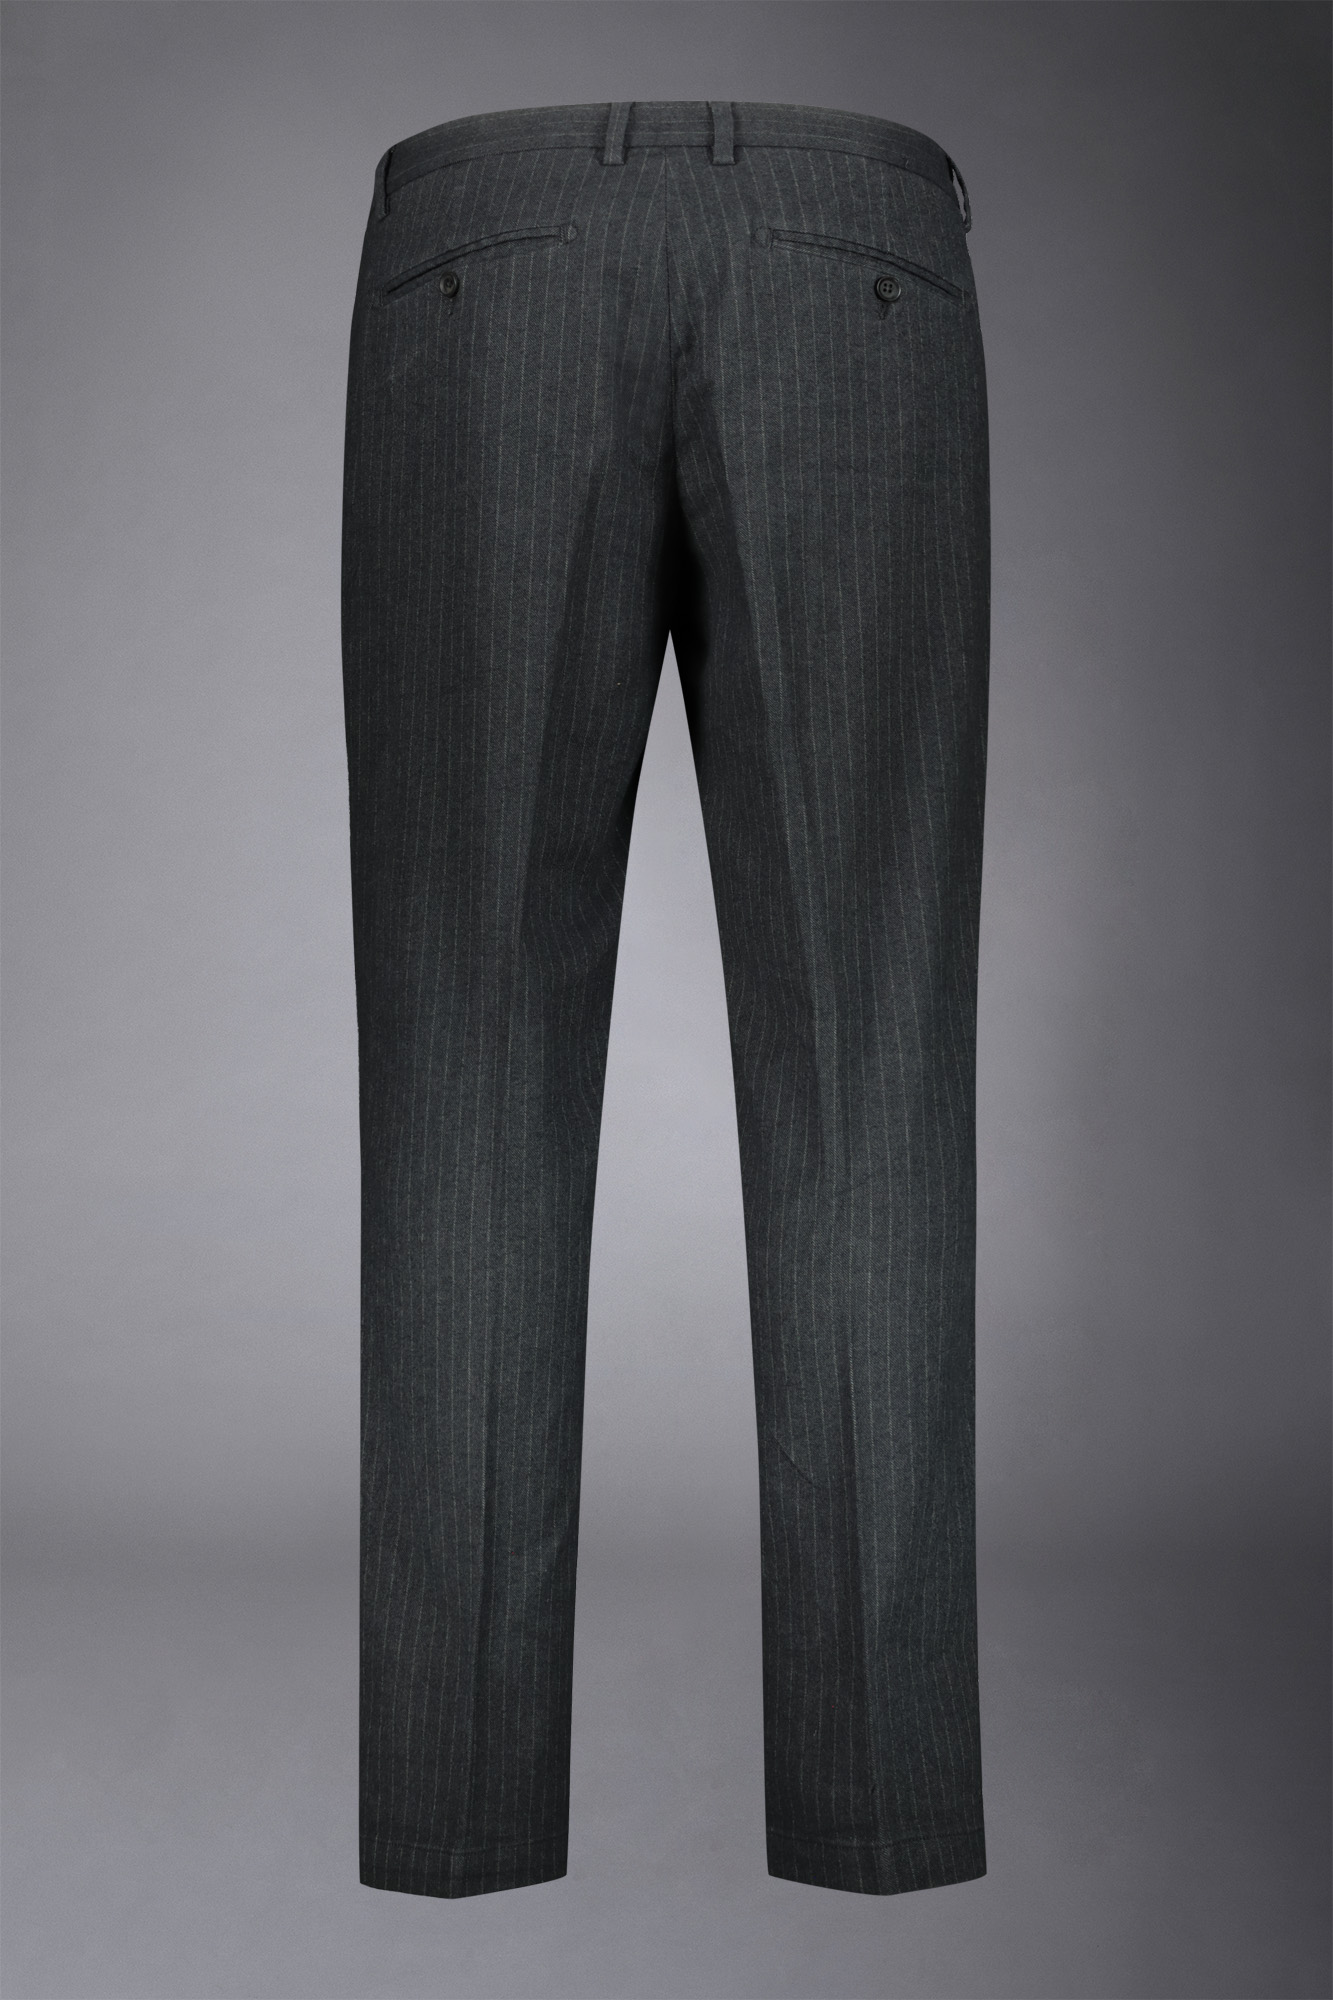 Men's chino pants woven cotton hand wool pinstripe comfort fit image number null